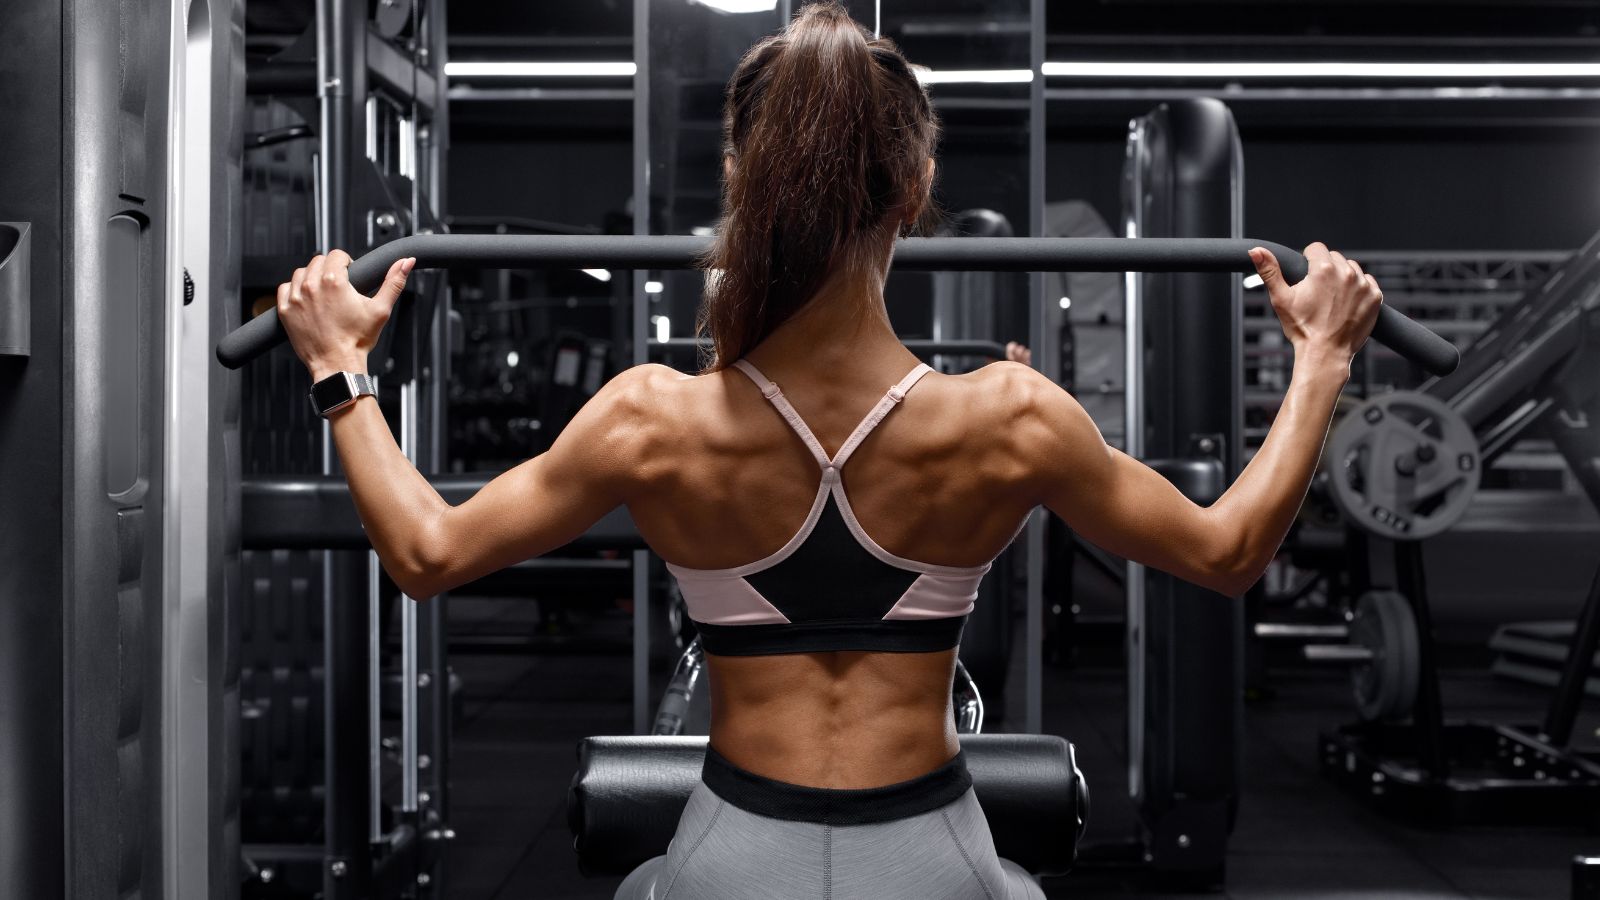 Shoulder and Back Workouts You Should Include in Your Routine - My Fit Foods